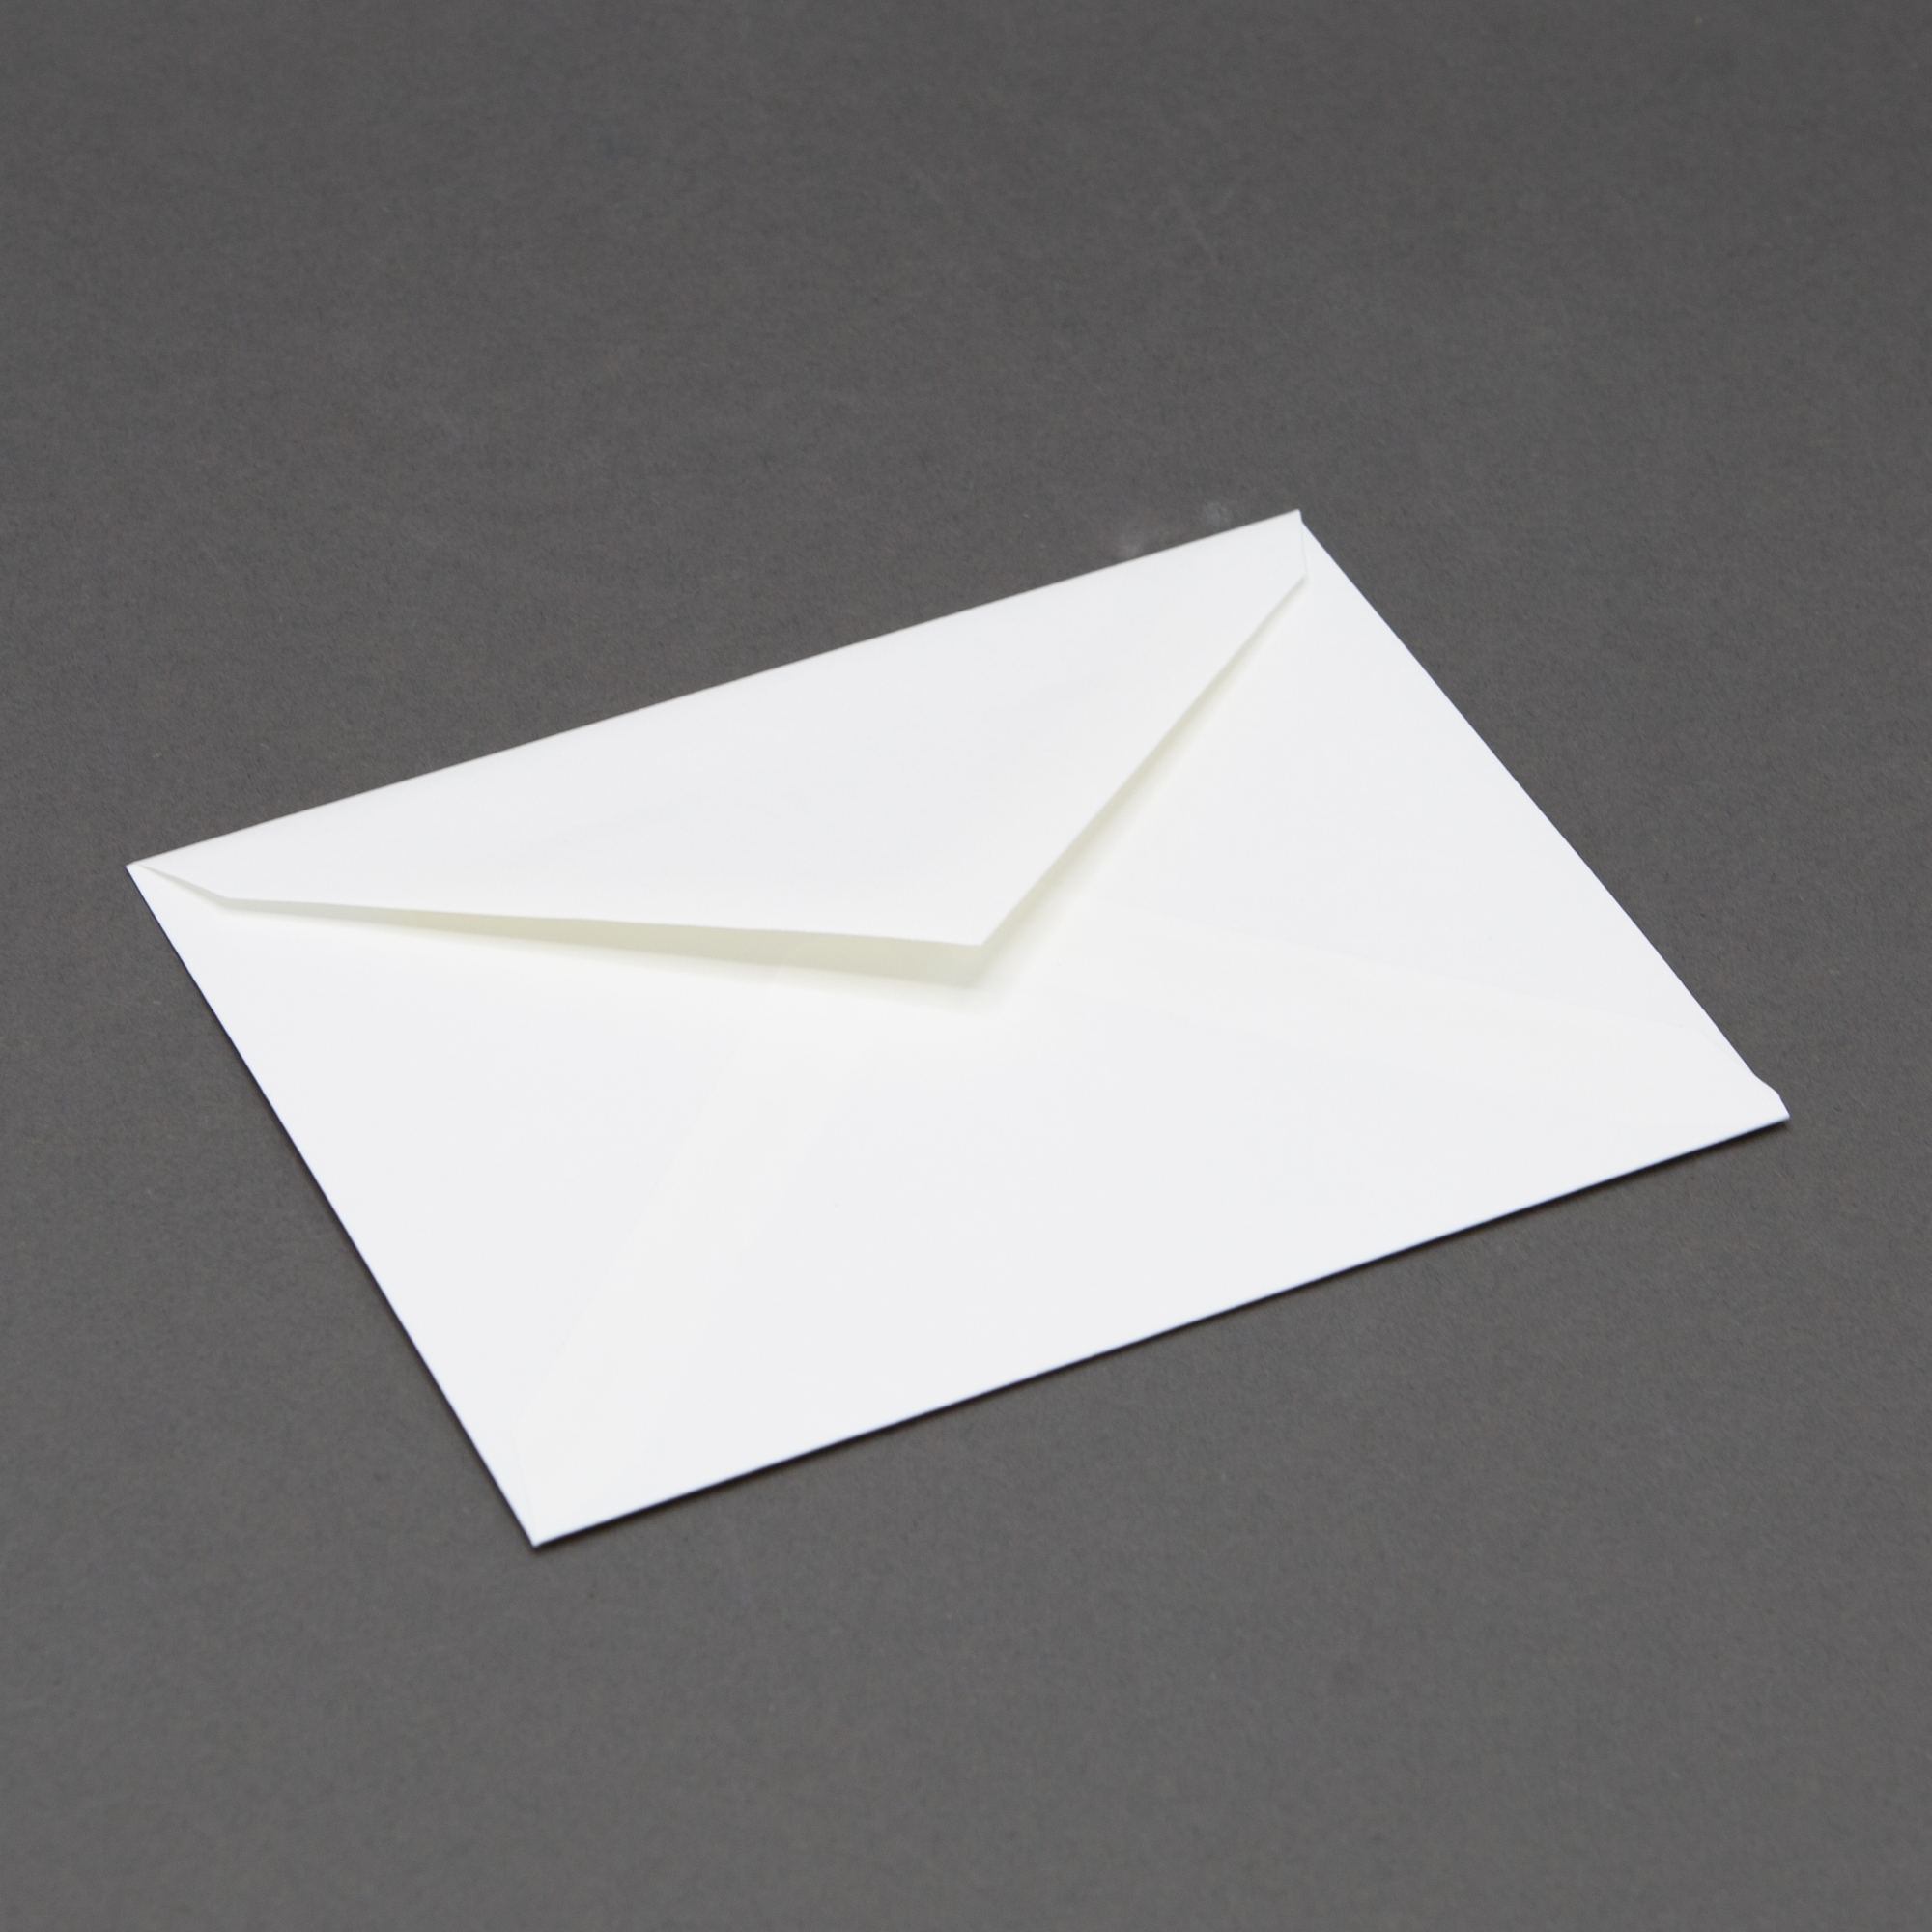 Finch 6 Bar White Envelope 4-3/4x6-1/2 250/box | Paper, Envelopes,  Cardstock & Wide format | Quick shipping nationwide | Paperworks